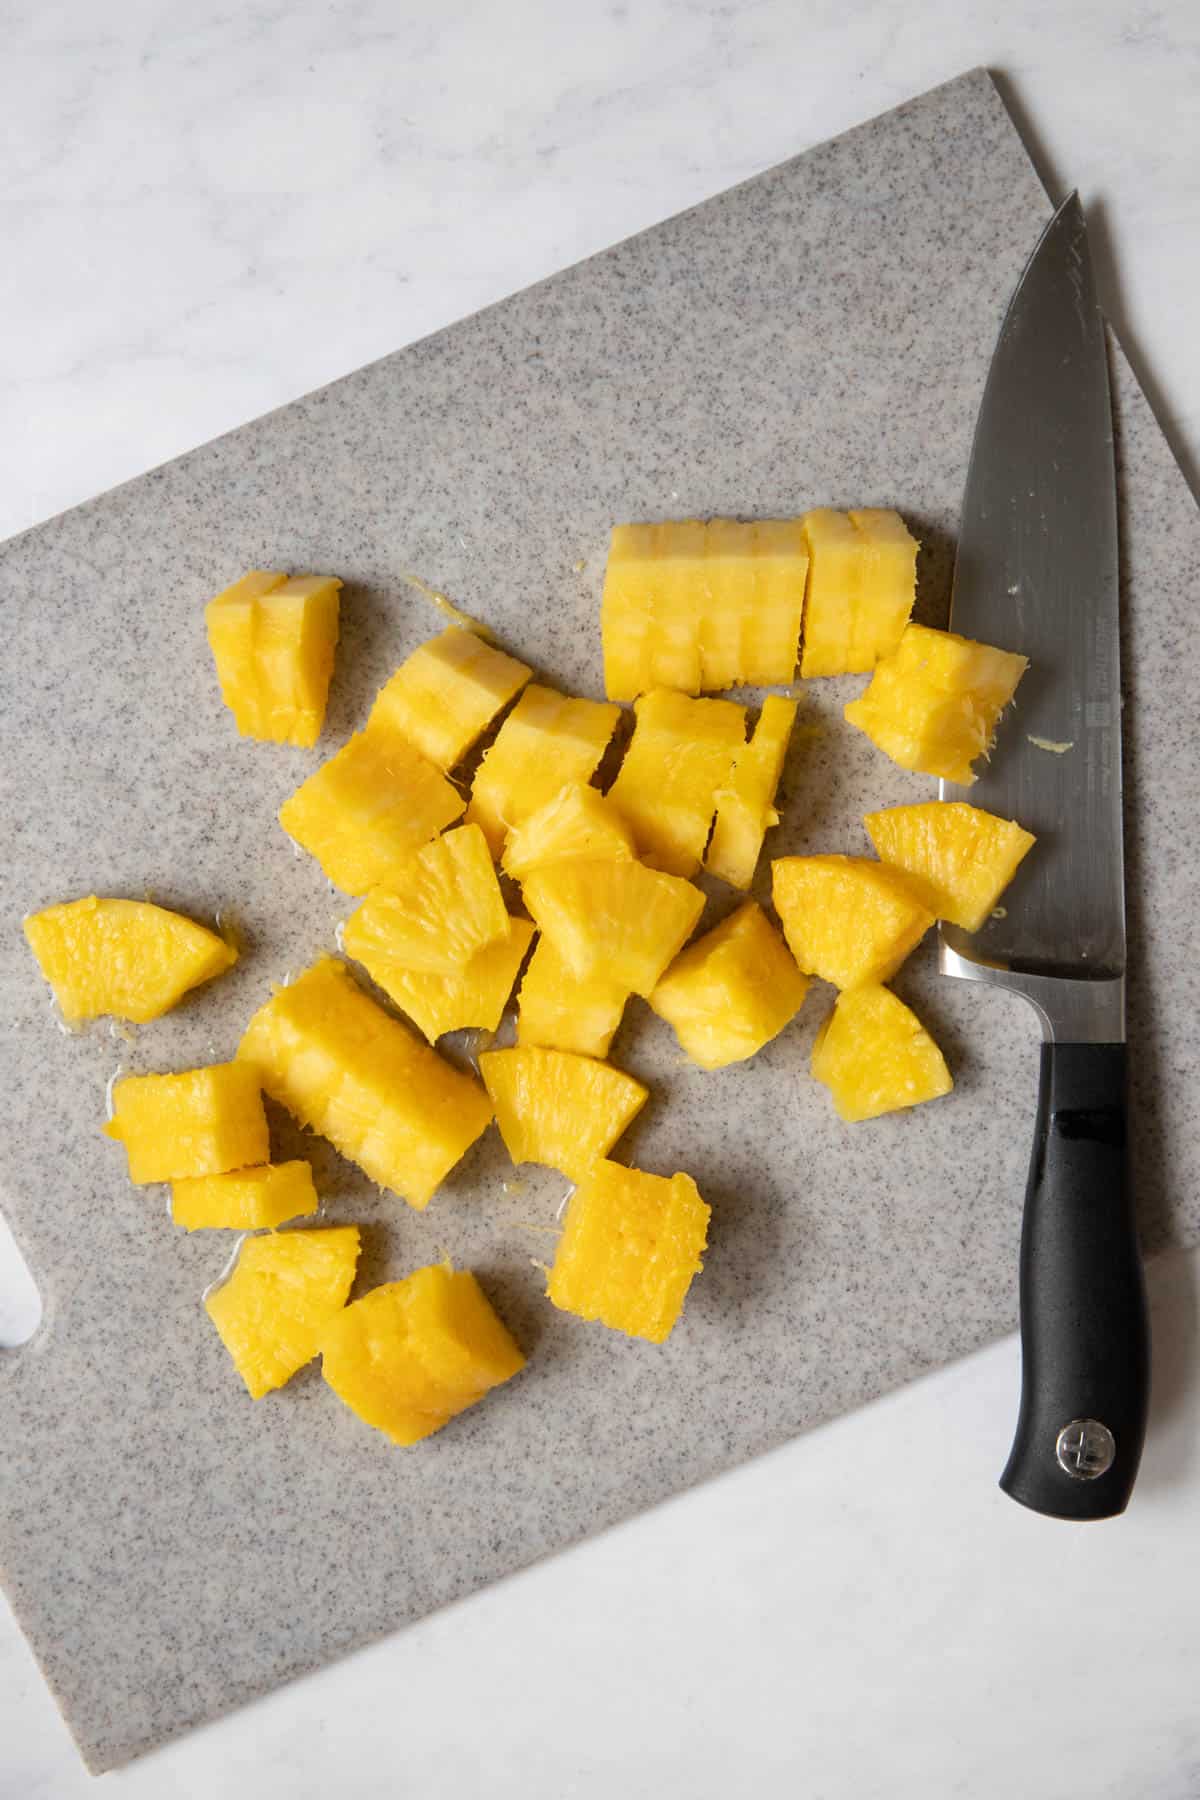 Pieces of cut pineapple on a cutting board with a sharp knife.